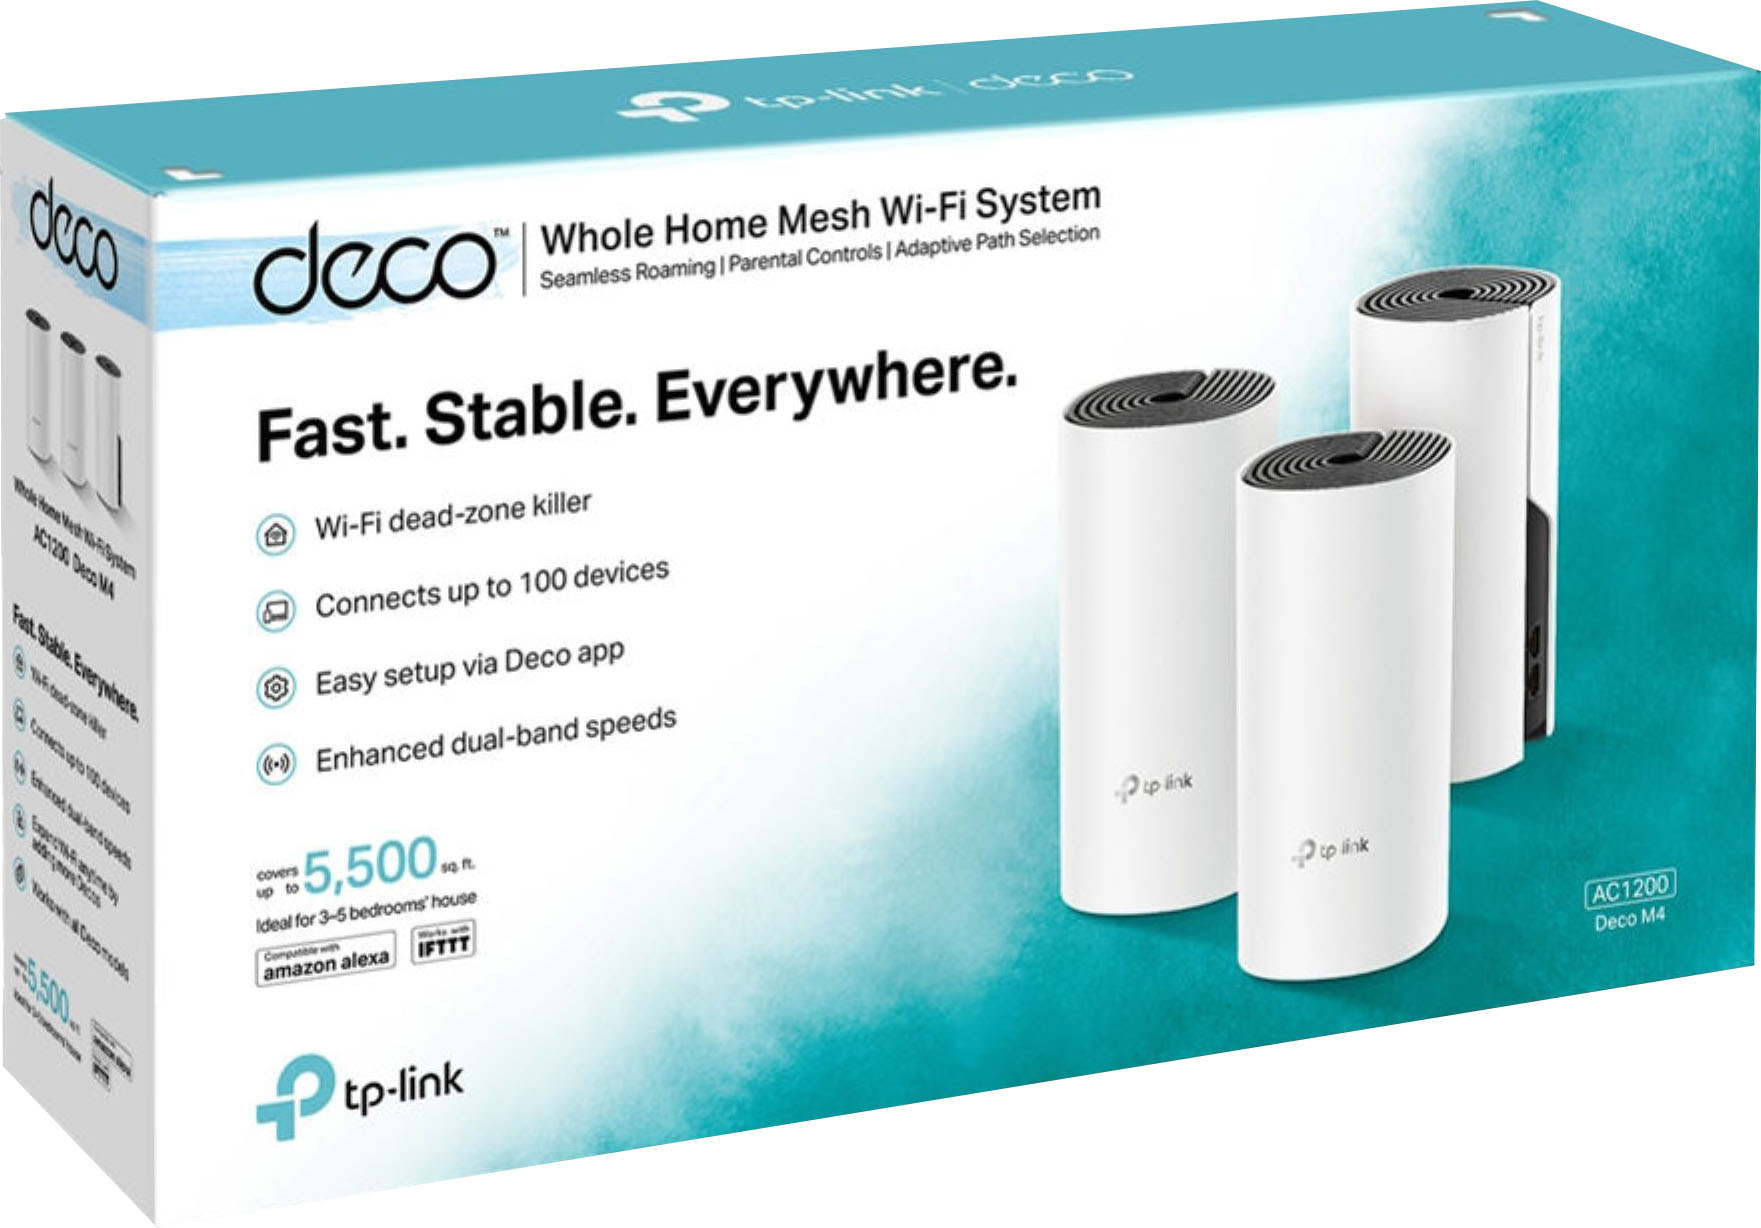  TP-Link Deco Whole Home Mesh WiFi Router – Dual Band Gigabit  Wireless Router, Supports Beamforming, MU-MIMO, IPv6 and Parental Controls,  Up to 2,000 sq. ft. Coverage(Deco M4 1-Pack) (Renewed) : Electronics